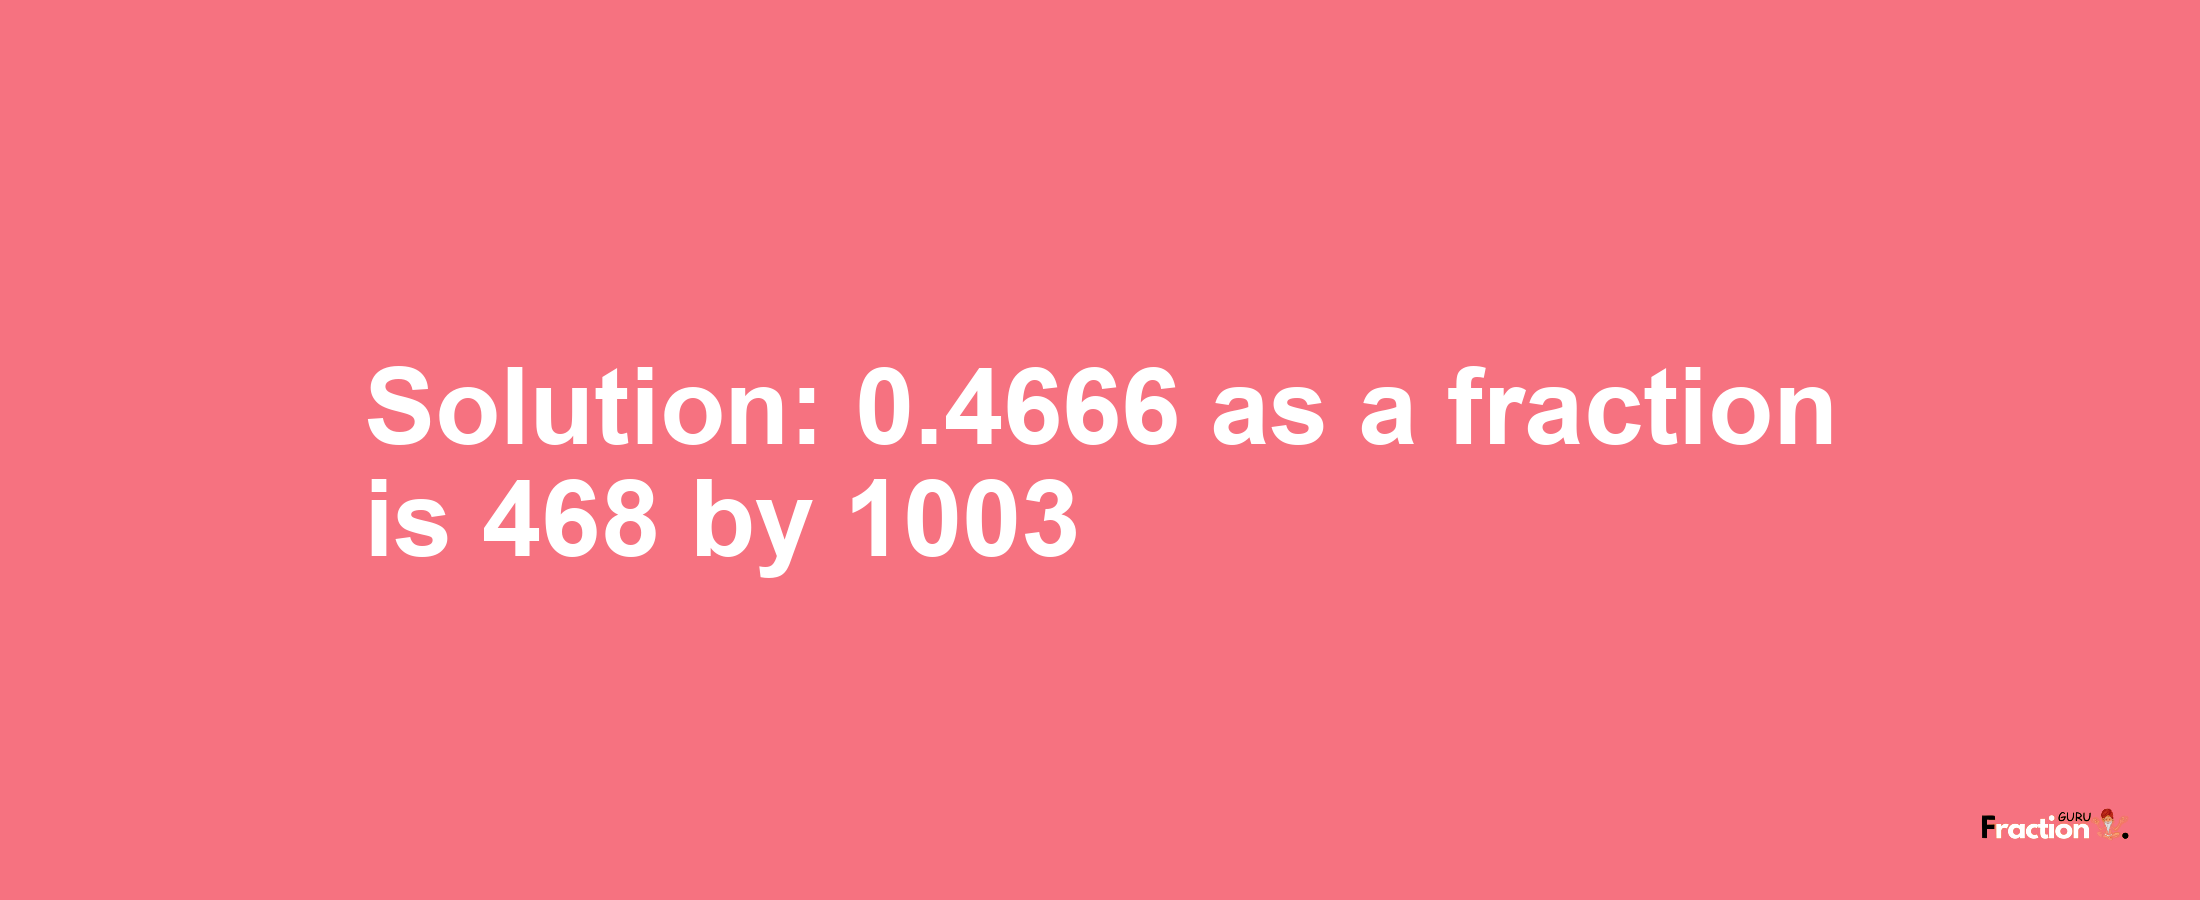 Solution:0.4666 as a fraction is 468/1003